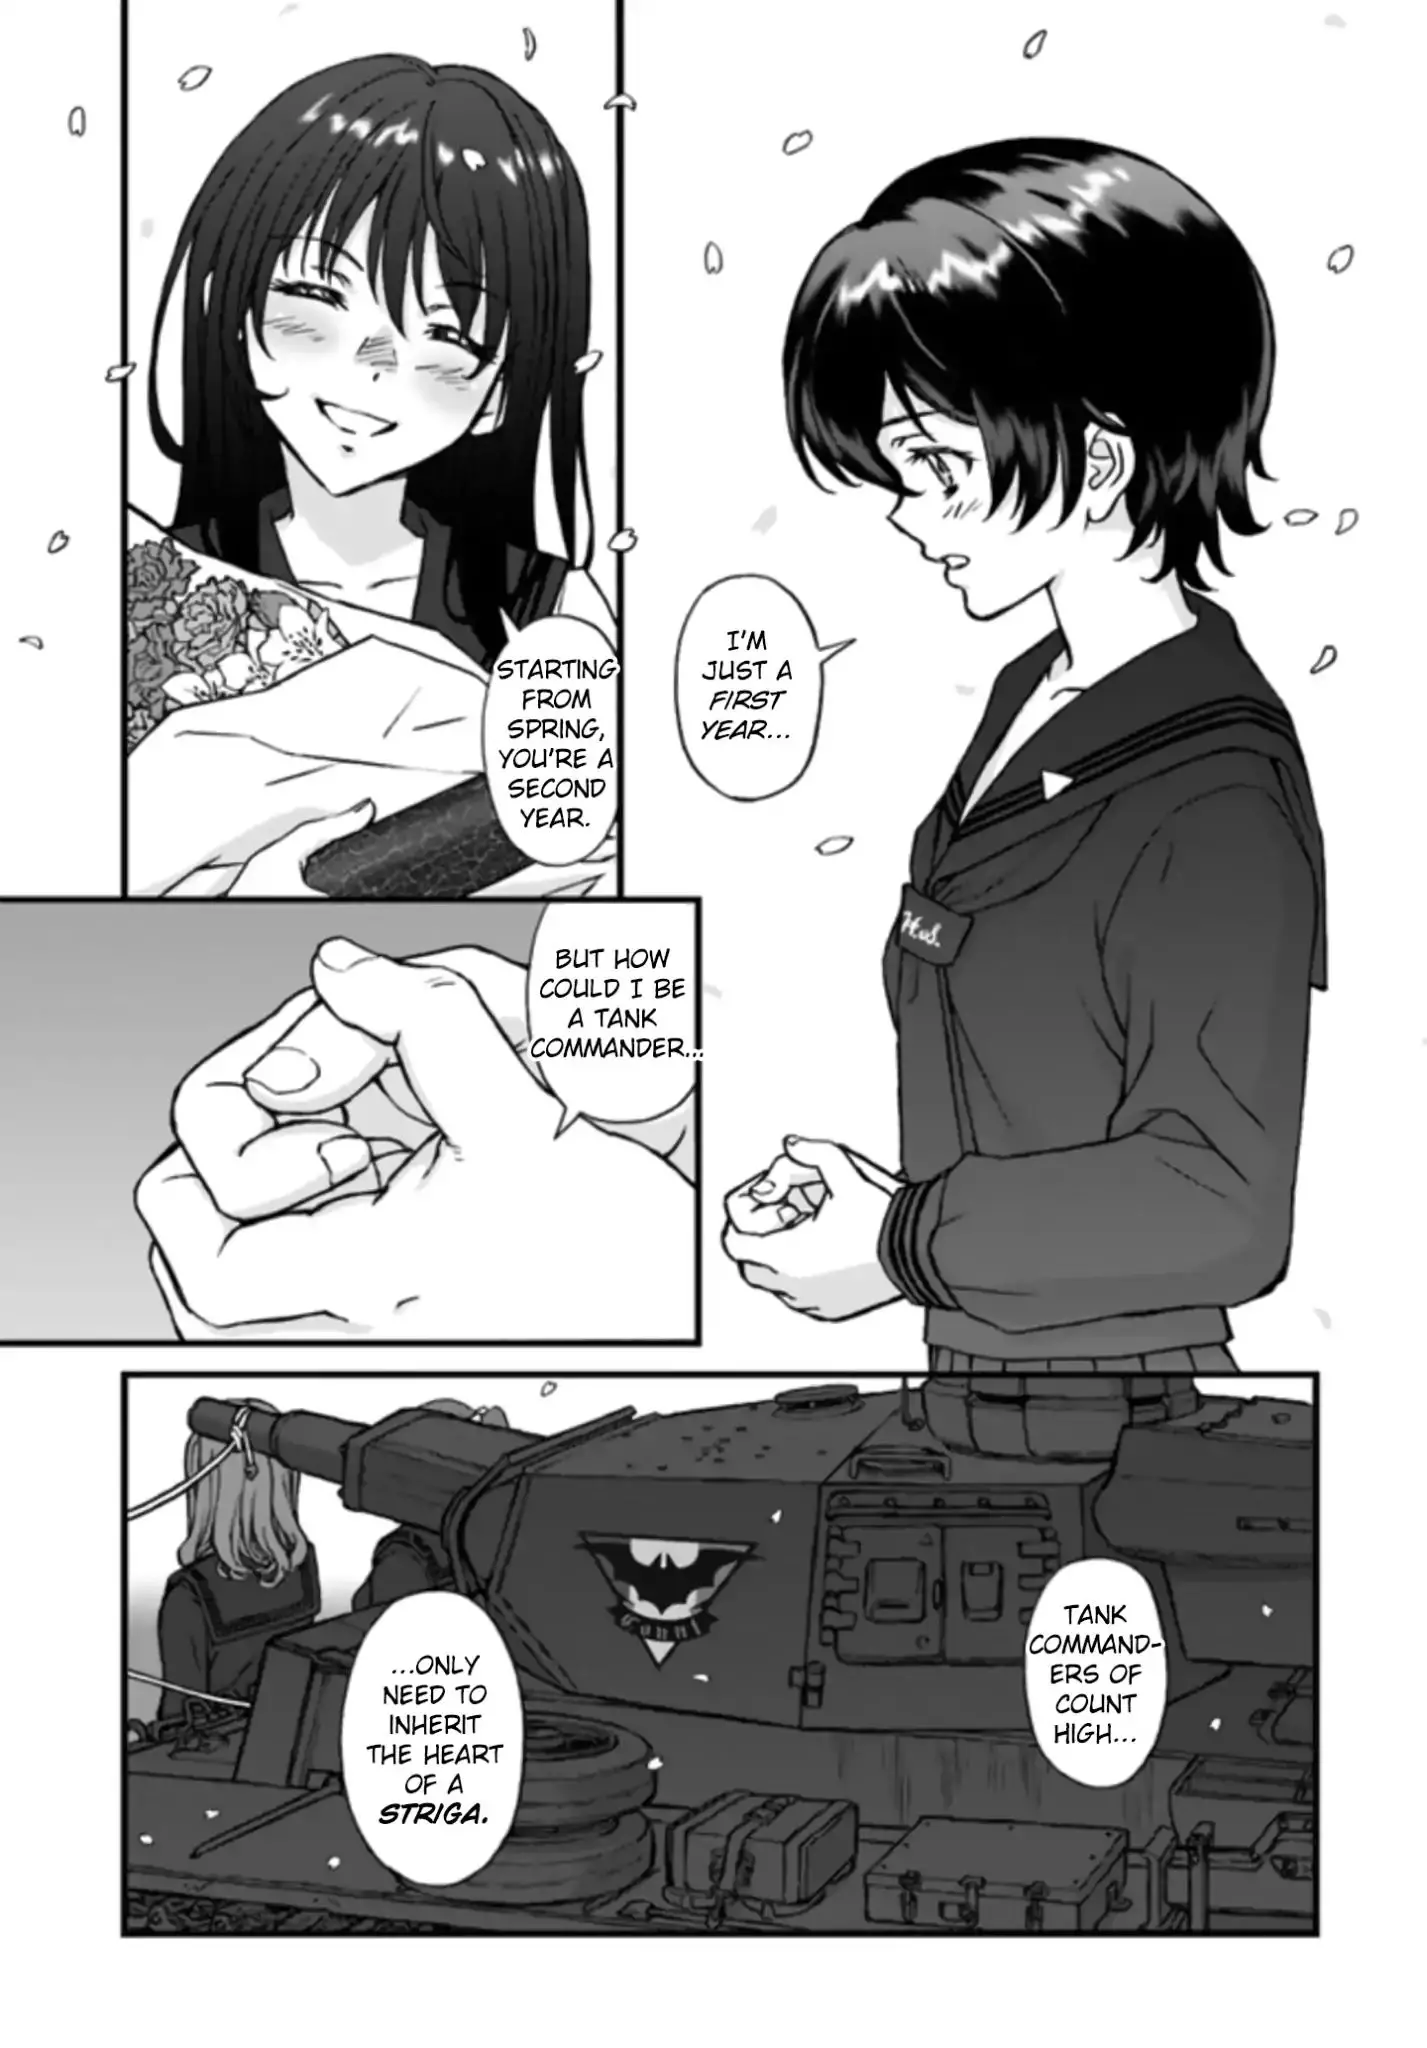 Girls Und Panzer - The Fir Tree And The Iron-Winged Witch - 2 page 11